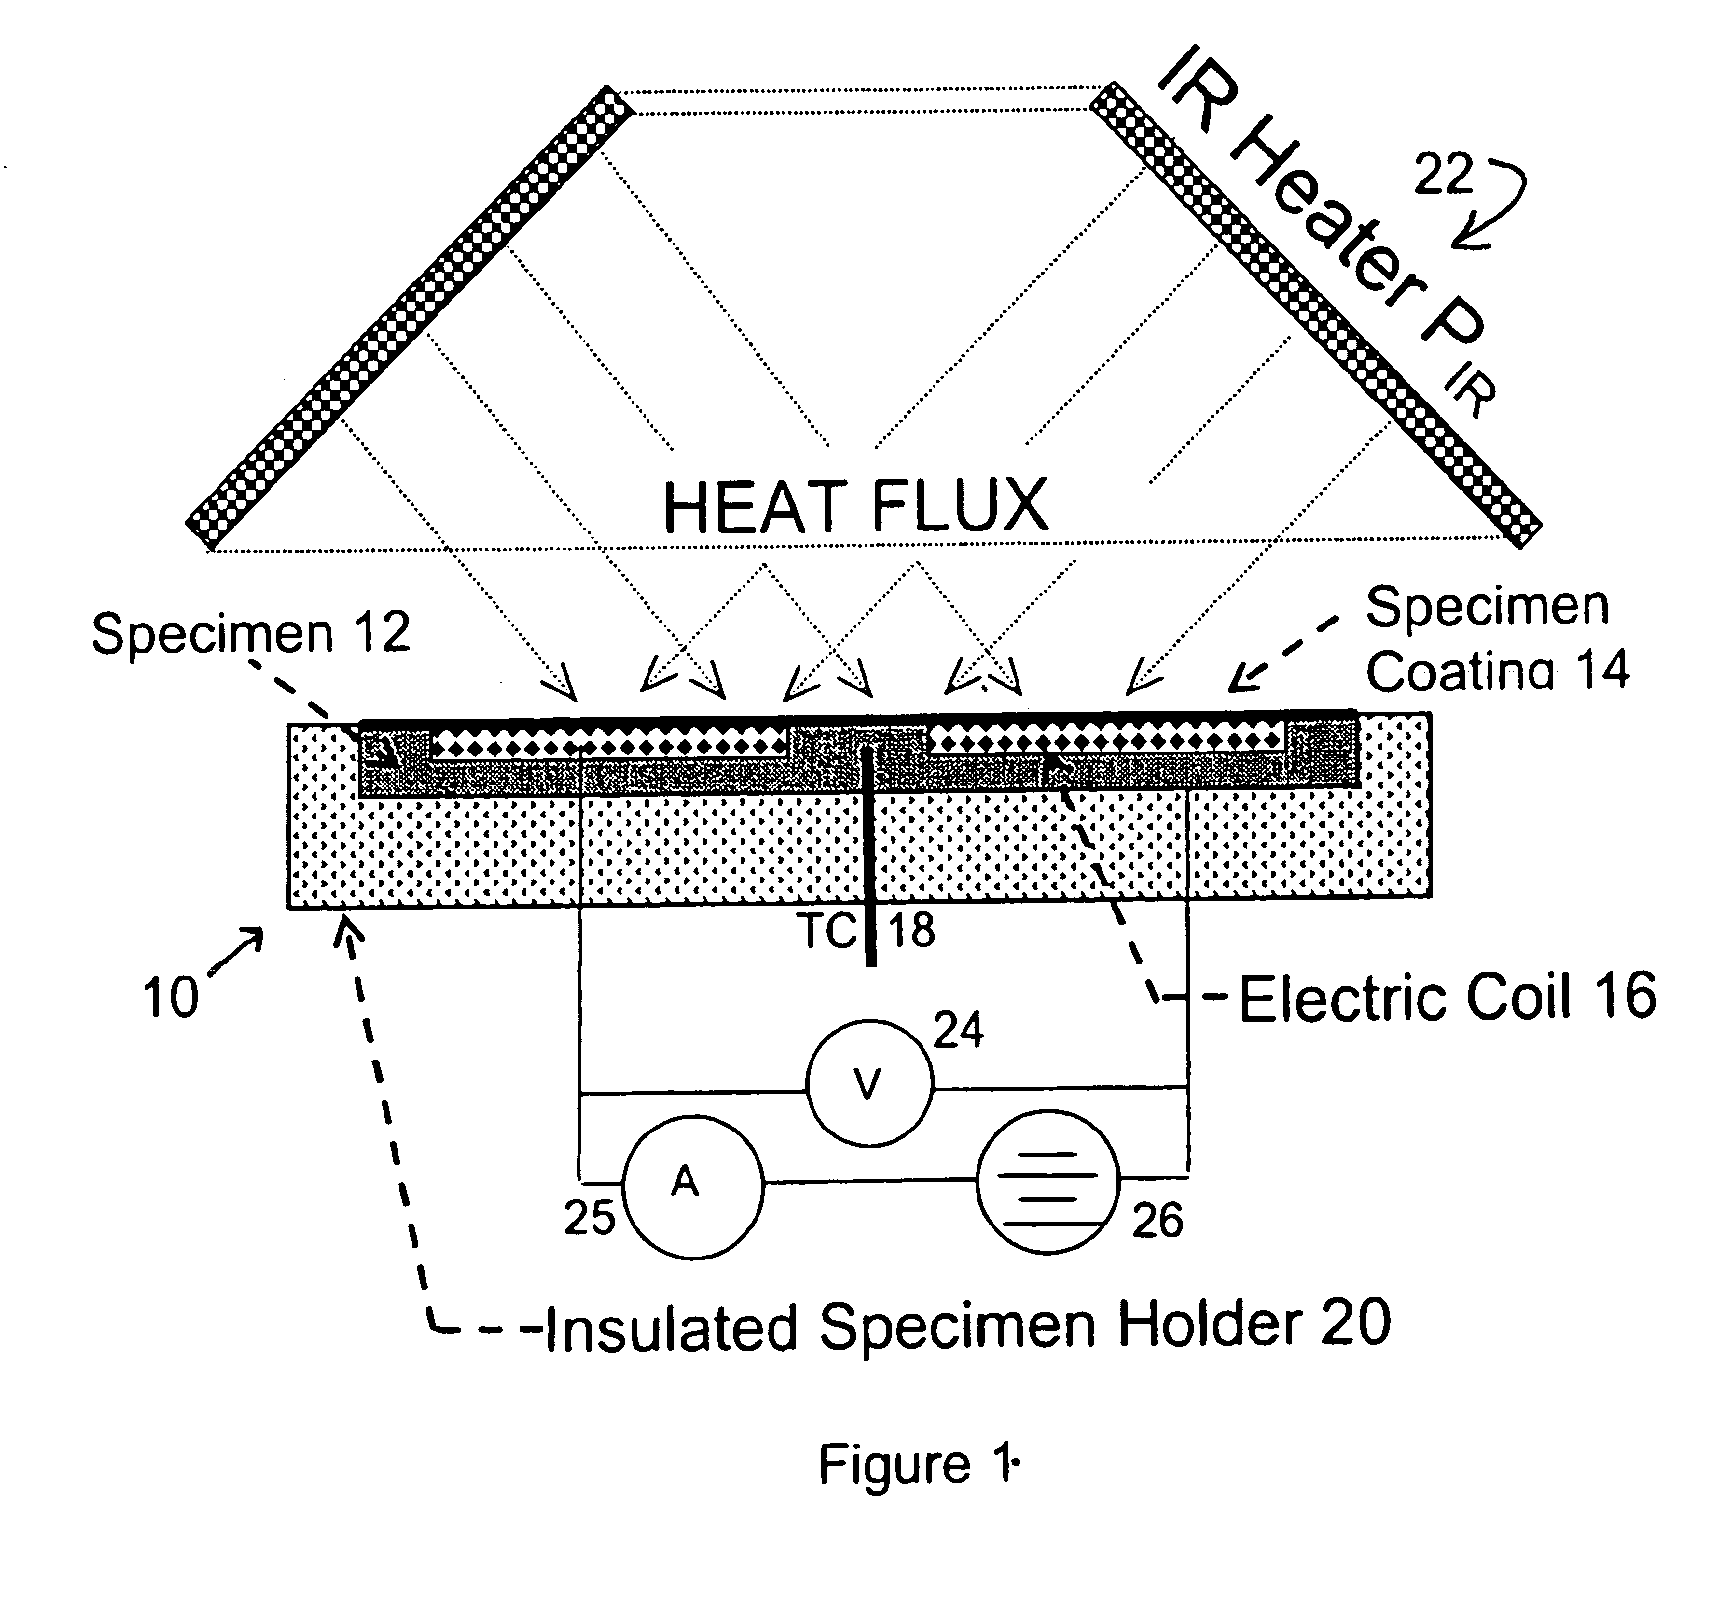 Device and method for measuring absorbed heat flux in a fire test apparatus